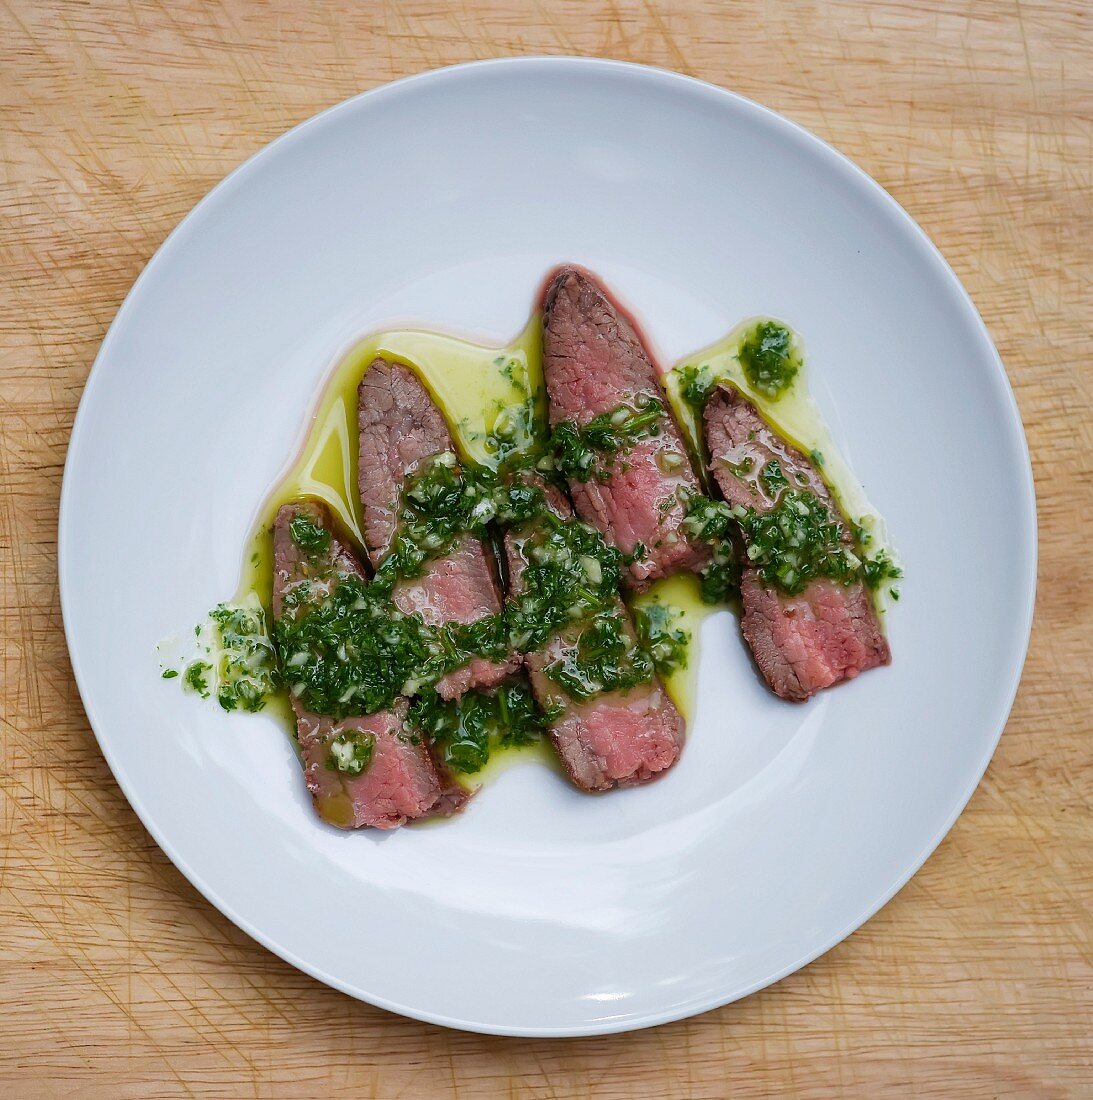 Sliced Steak Topped with Chimichurri Sauce